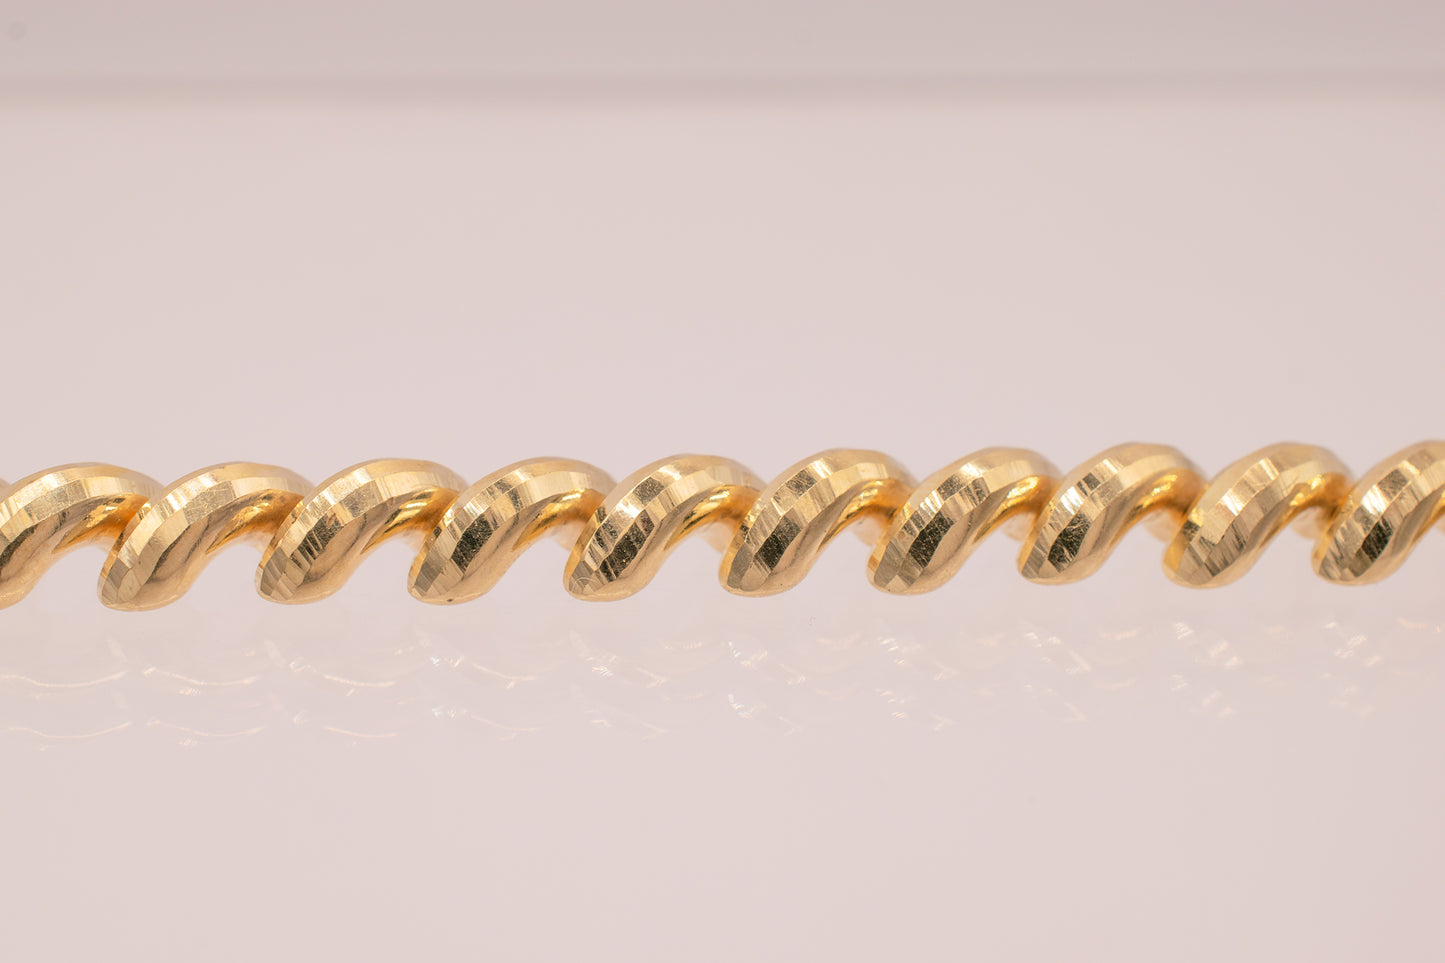 Vintage 14K Yellow Gold San Marco Macaroni Link Bracelet With Shimmering High Polish Finish 7 1/2 inches